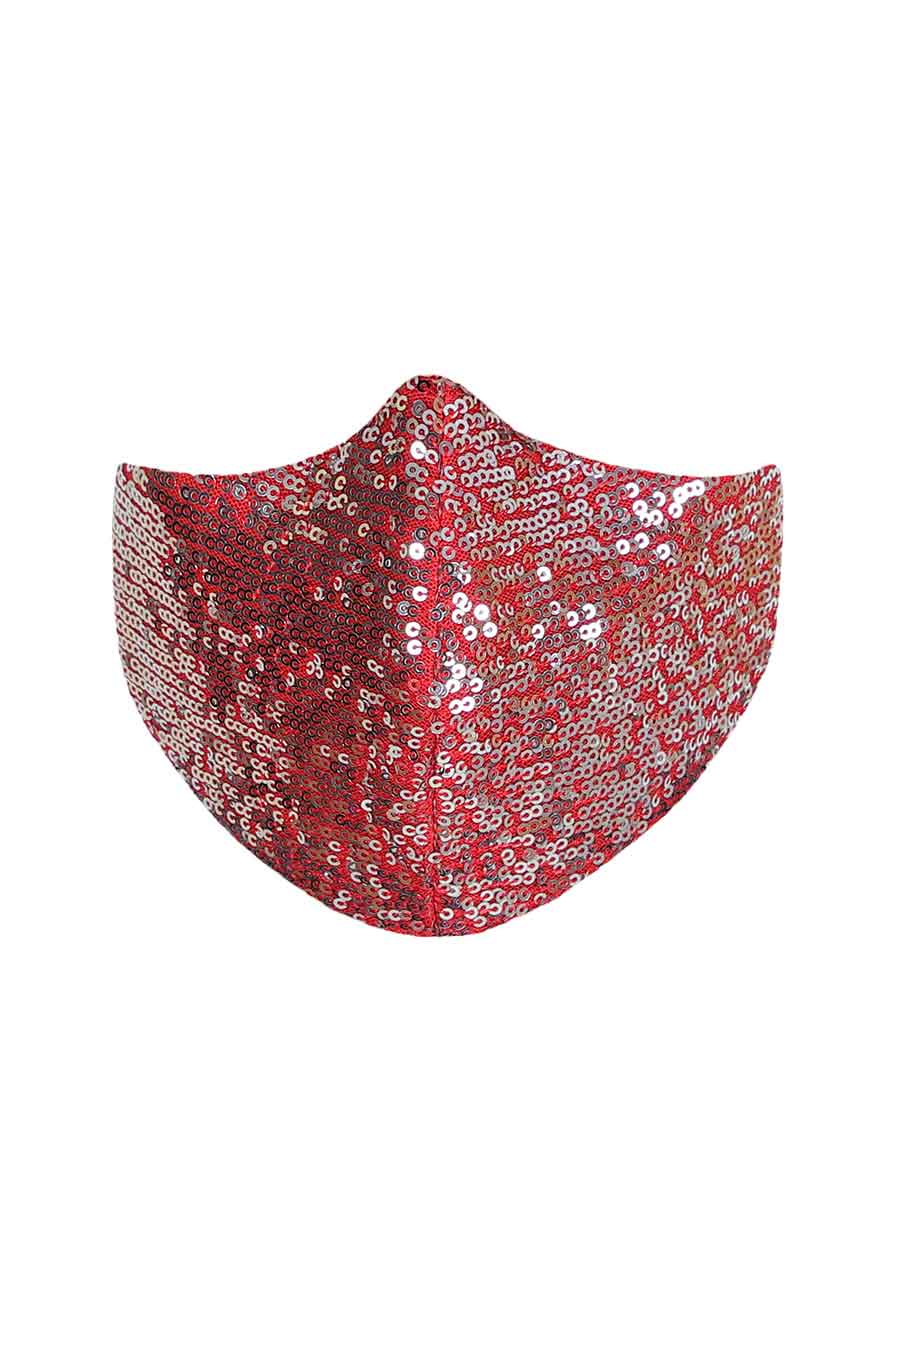 Red Sequin Embroidered 3 Ply Mask